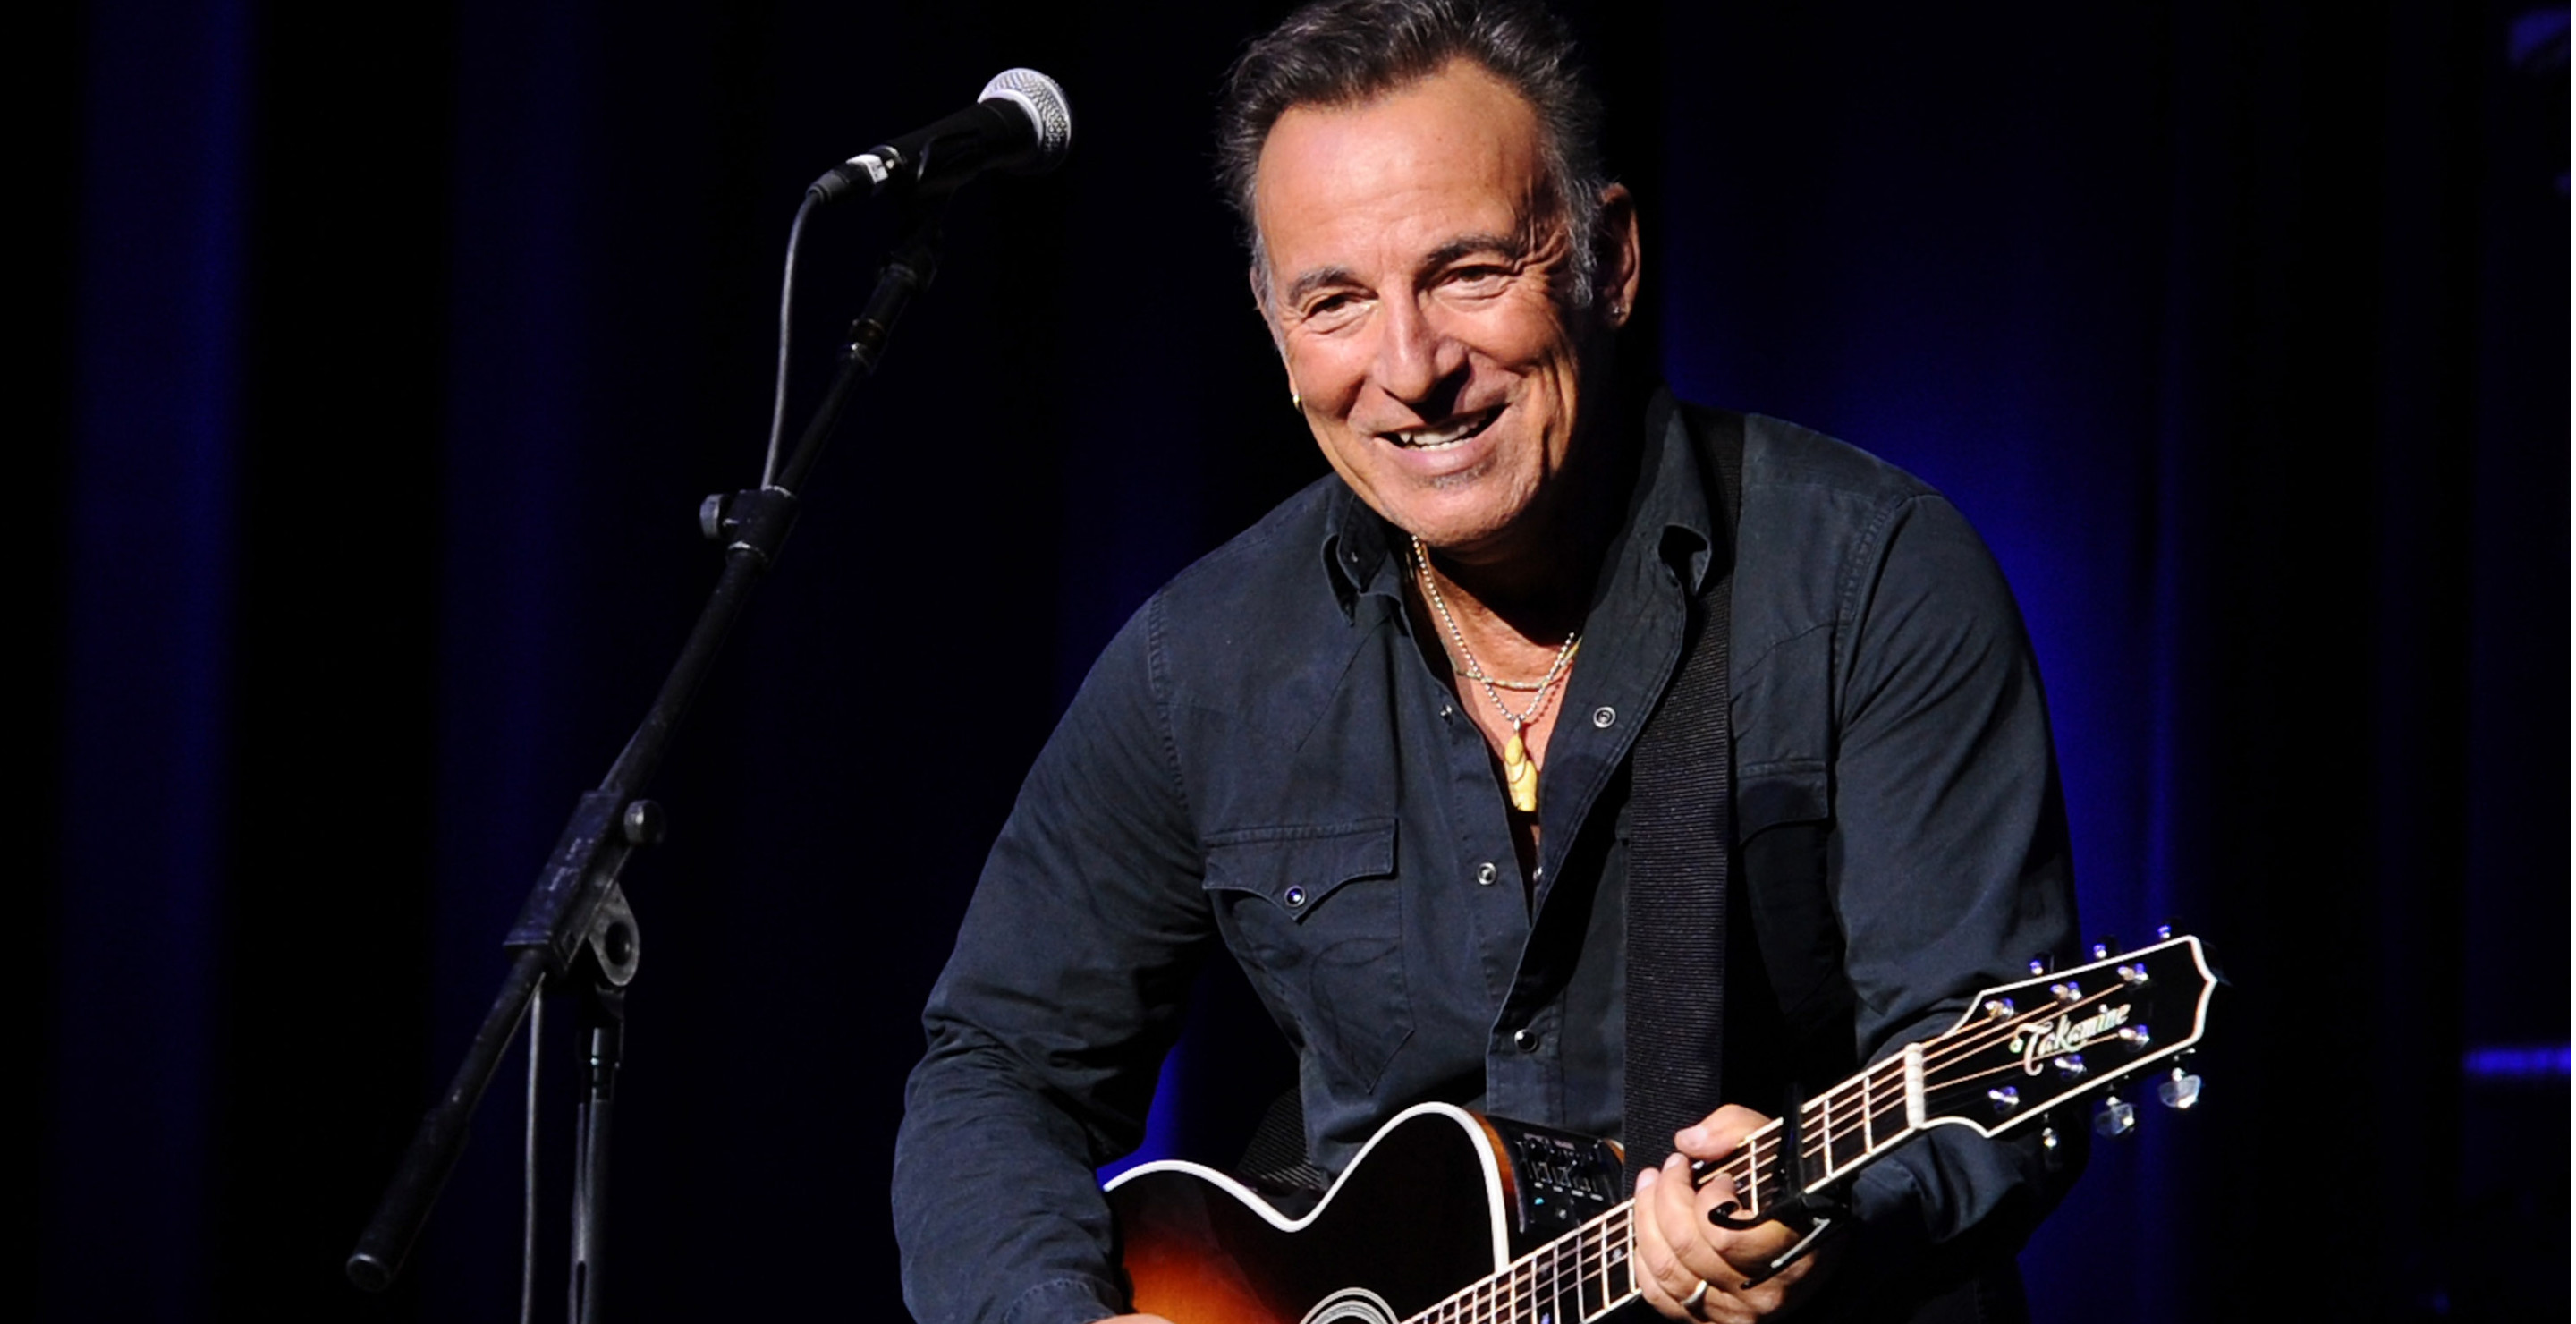 Bruce Springsteen Triumphally Returns to the Stage Only to Get Roasted Online